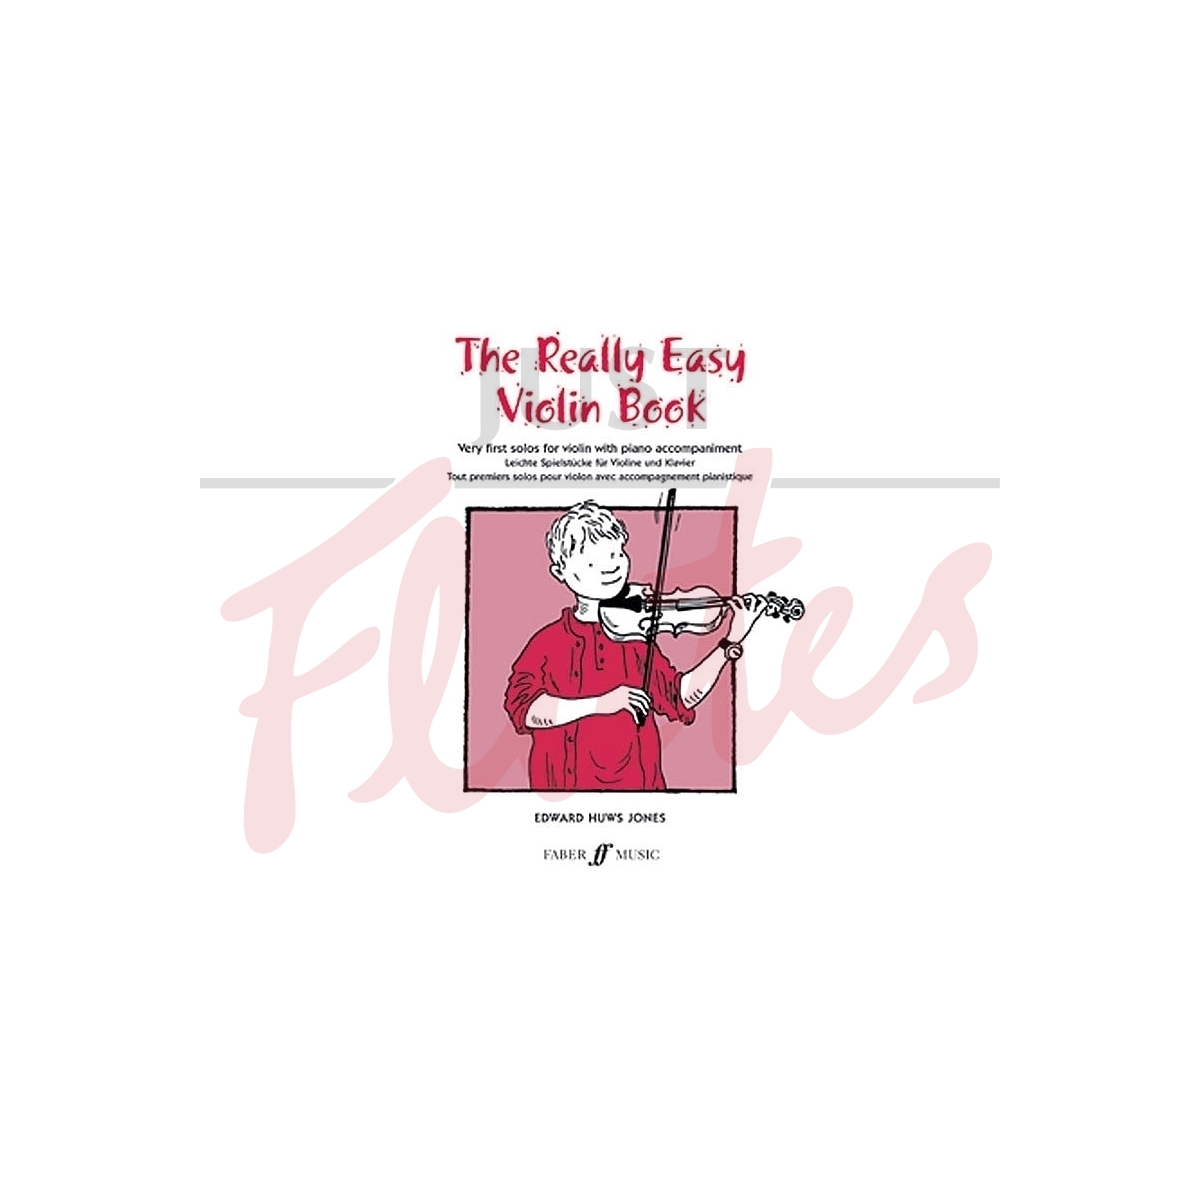 The Really Easy Violin Book